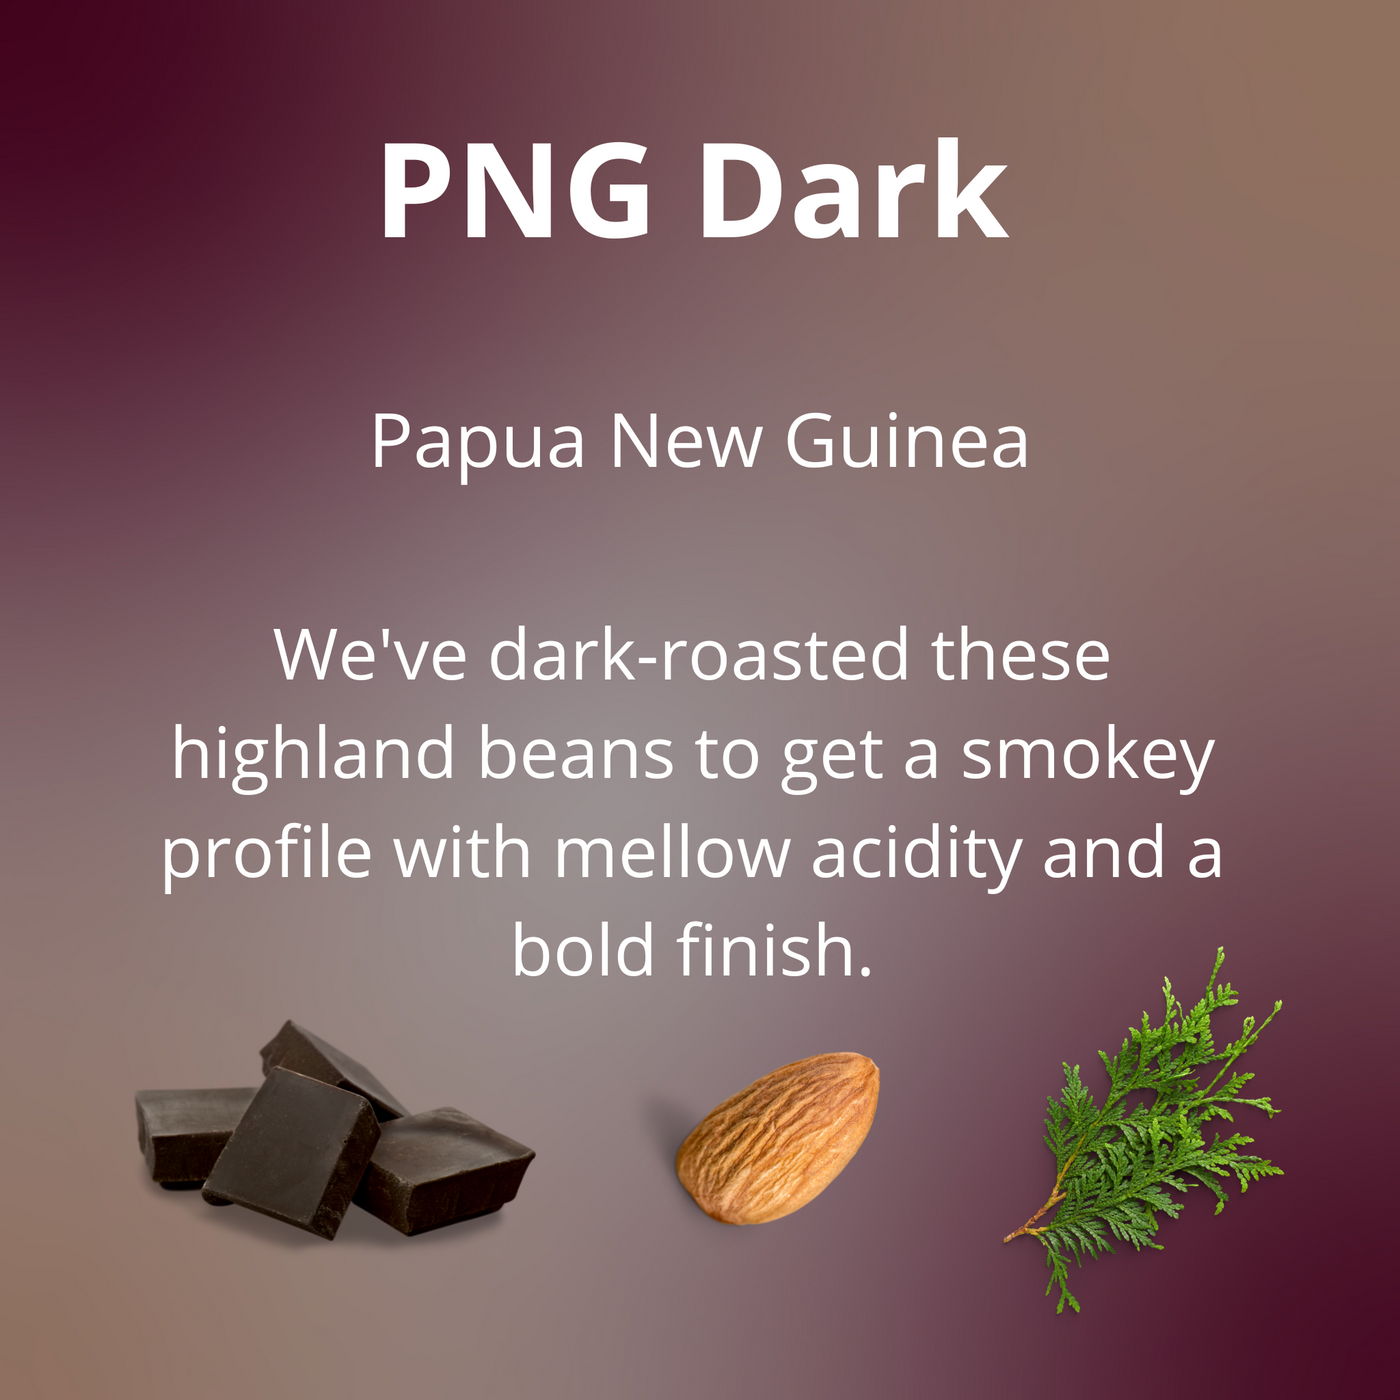 PNG Dark from Papua New Guinea is a dark-roast with tasting notes of dark chocolate, almond and cedar. We've dark-roasted these highland beans to get a smokey profile with mellow acidity and a bold finish.